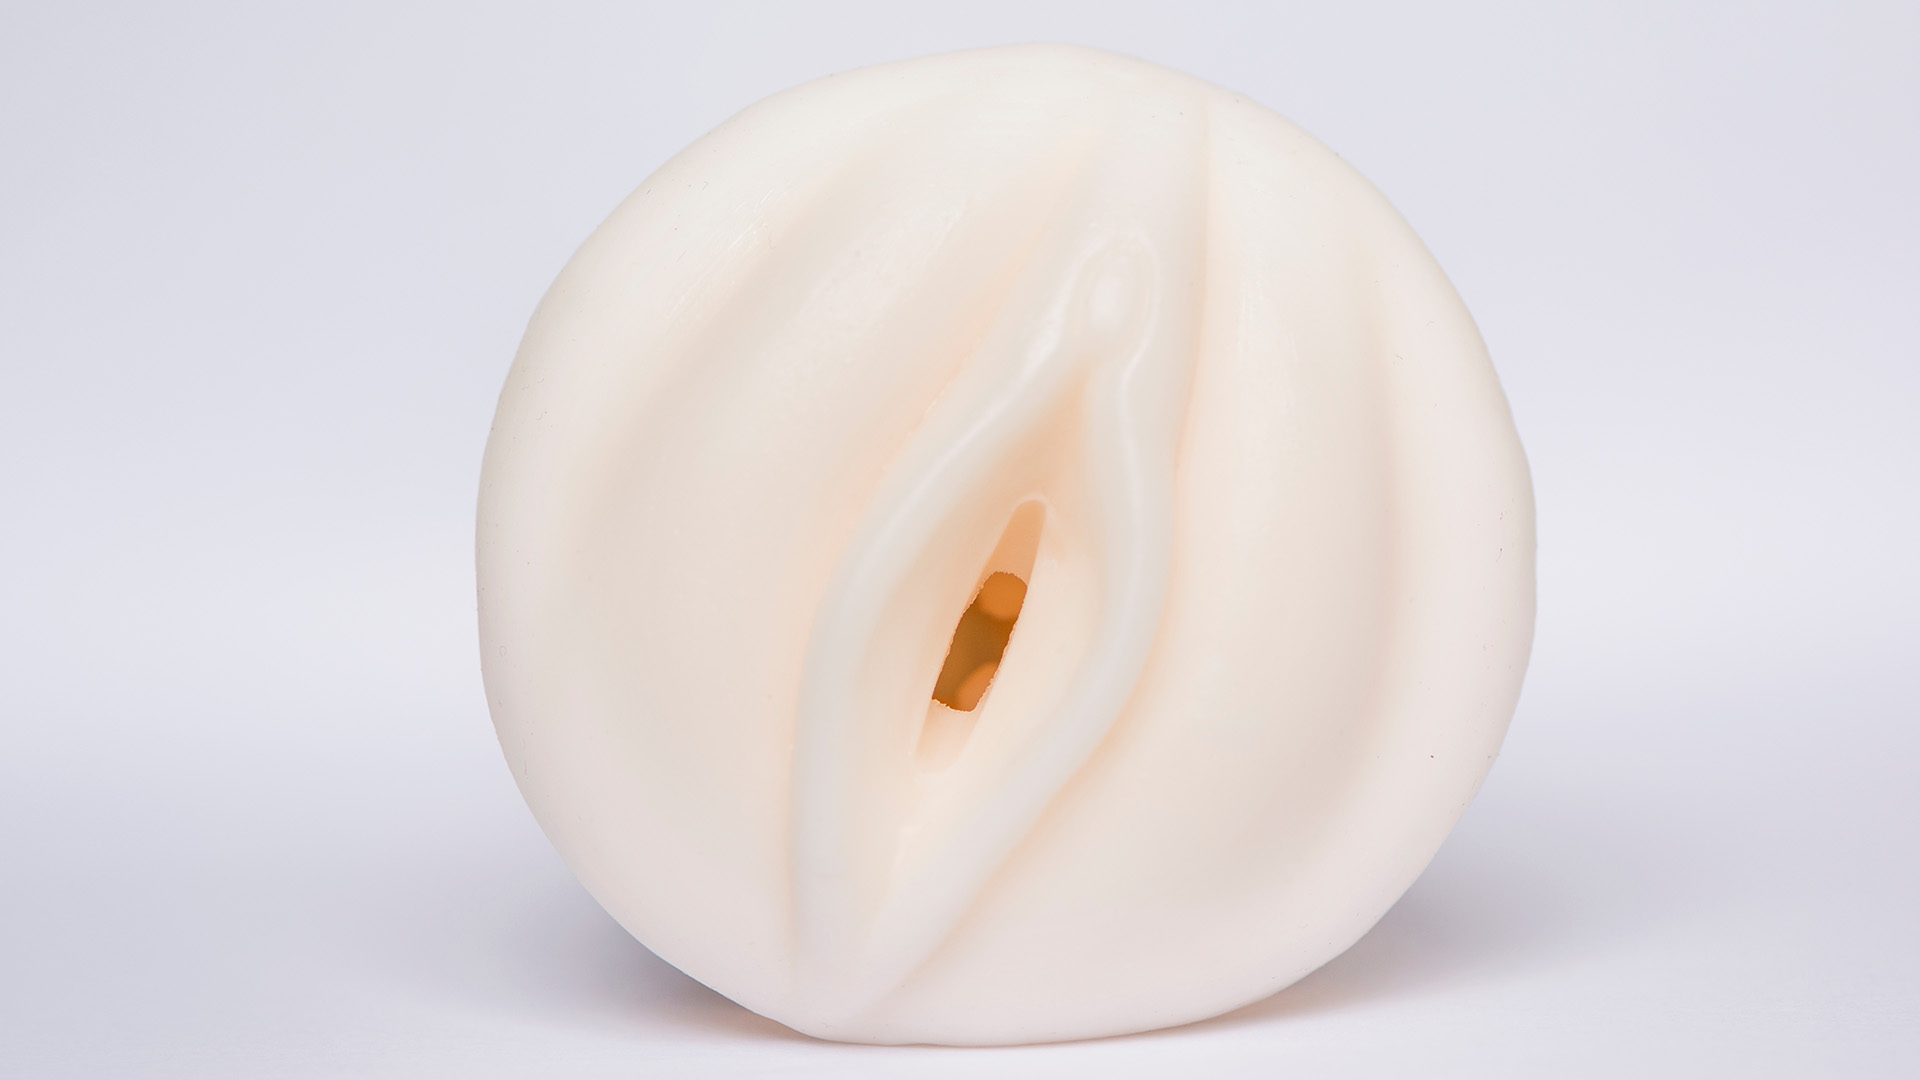 Beige fleshlight sex toy view from above in front of while background.